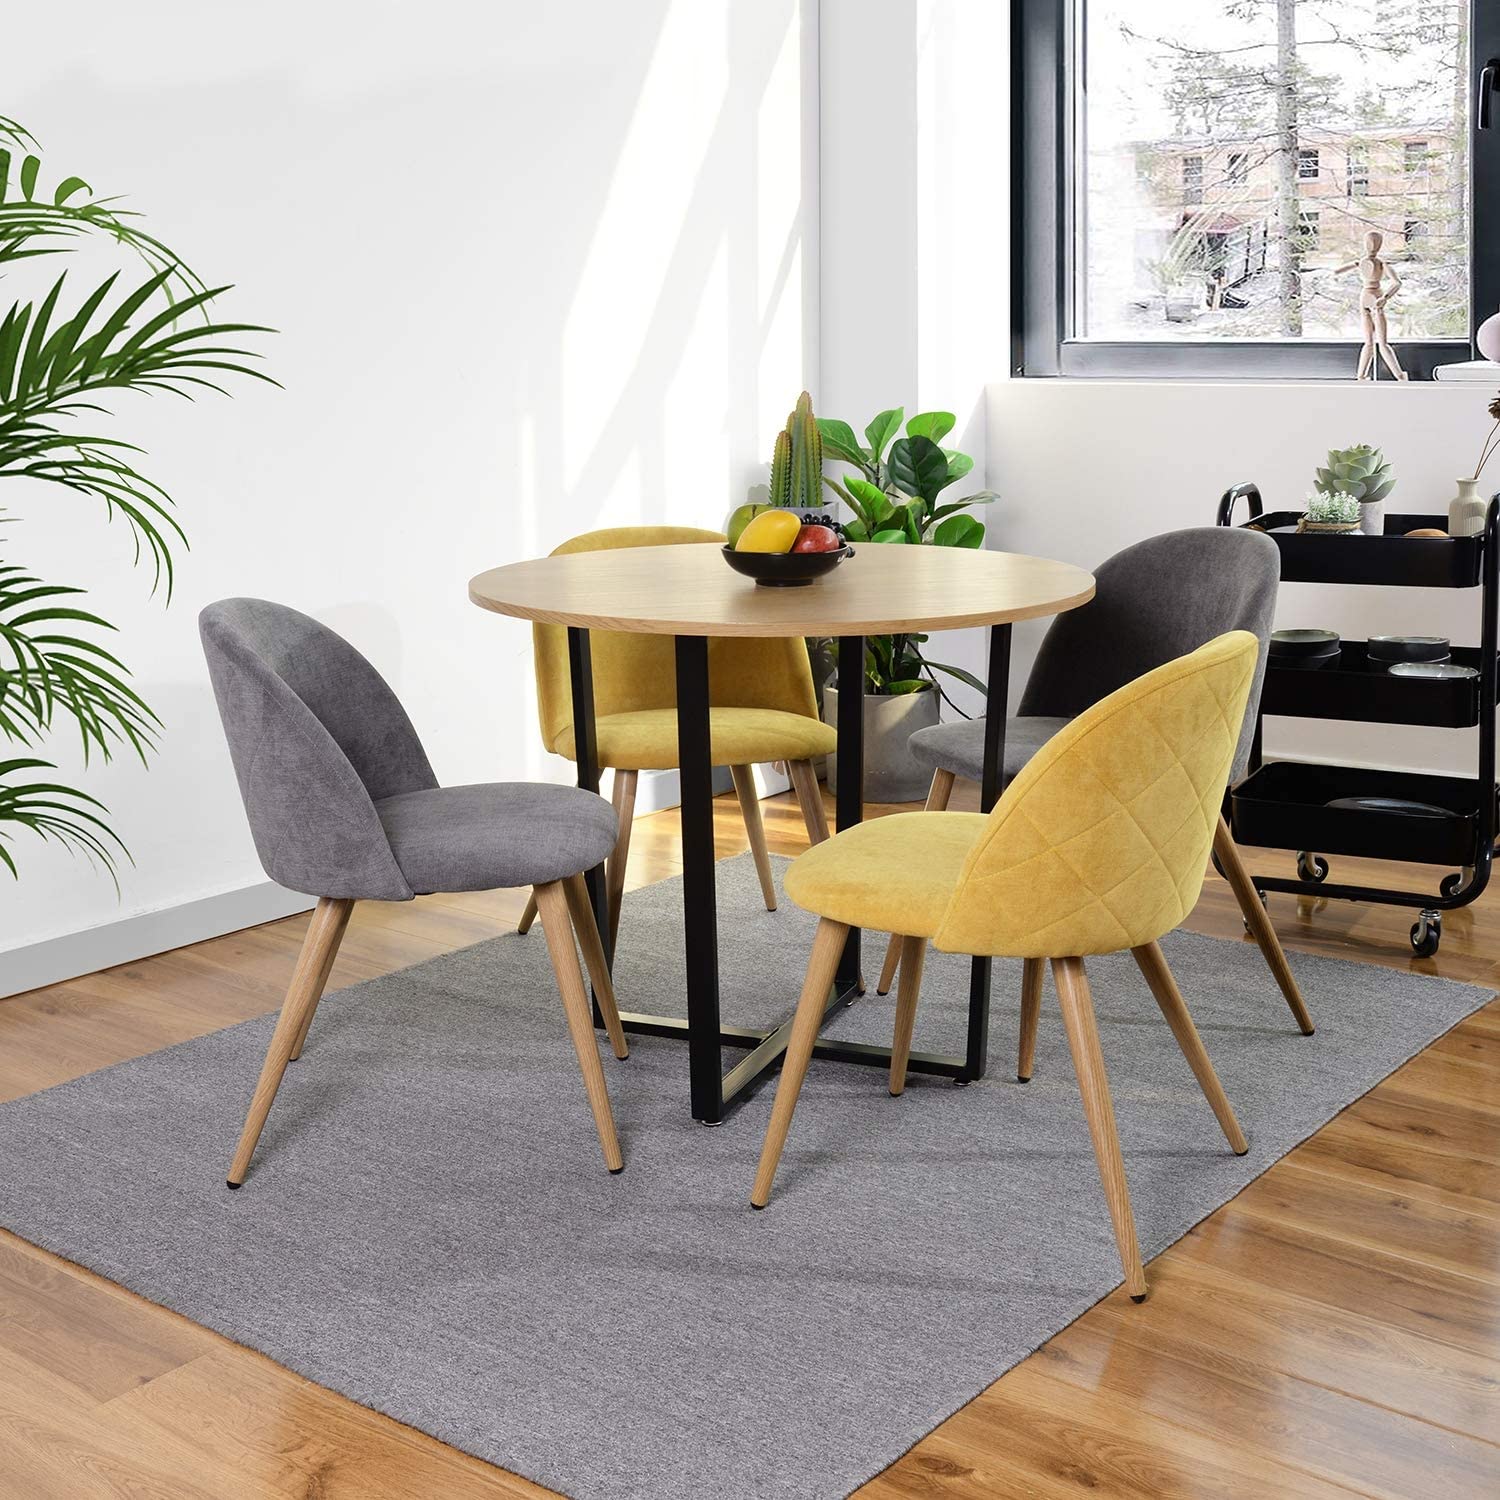 B08GDKGNLB Round Dining Table, FurnitureR Modern 80cm Wooden Dining Desk with Metal Legs Coffee End Table for Small Spaces Kitchen Dining Room Home Office Balcony Garden